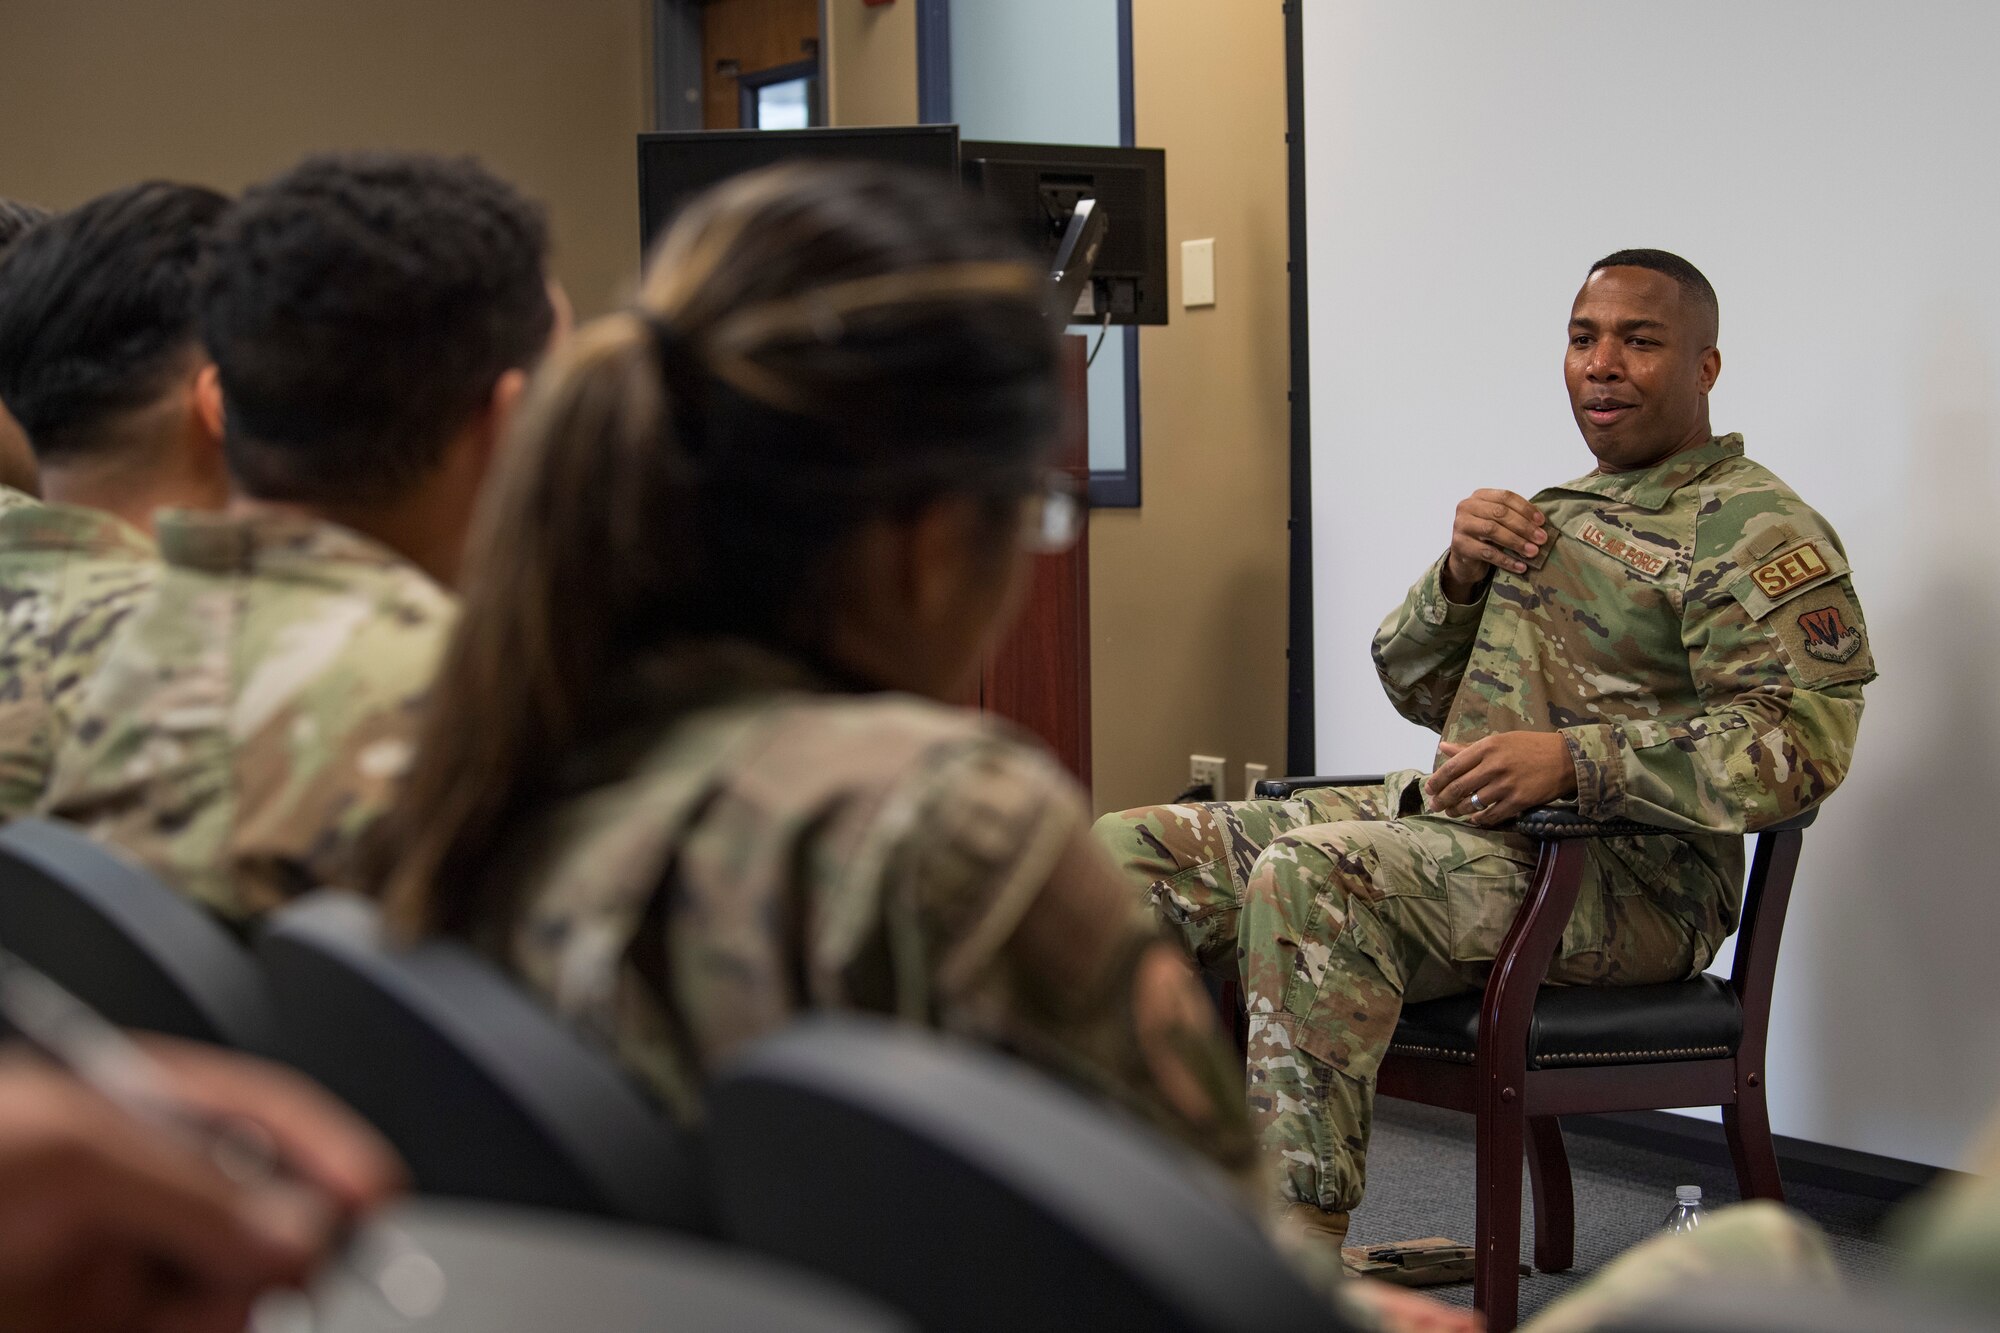 A photo of an Airman speaking while sitting in a chair